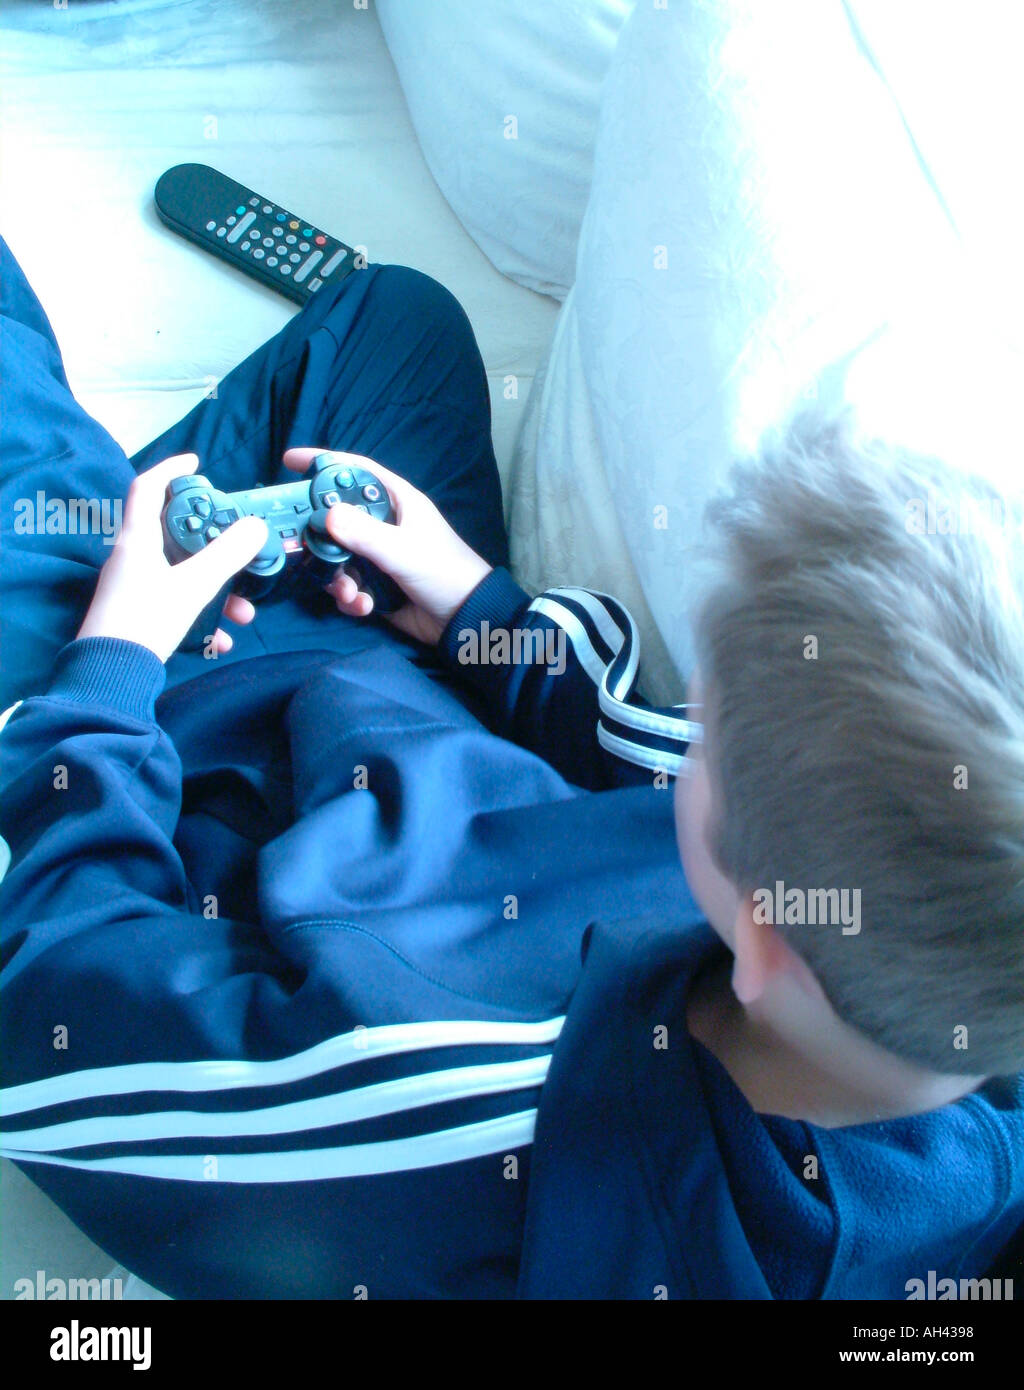 Crop on teenage boy and gamepad concentrating on screen screen not shown sitting on sofa Stock Photo